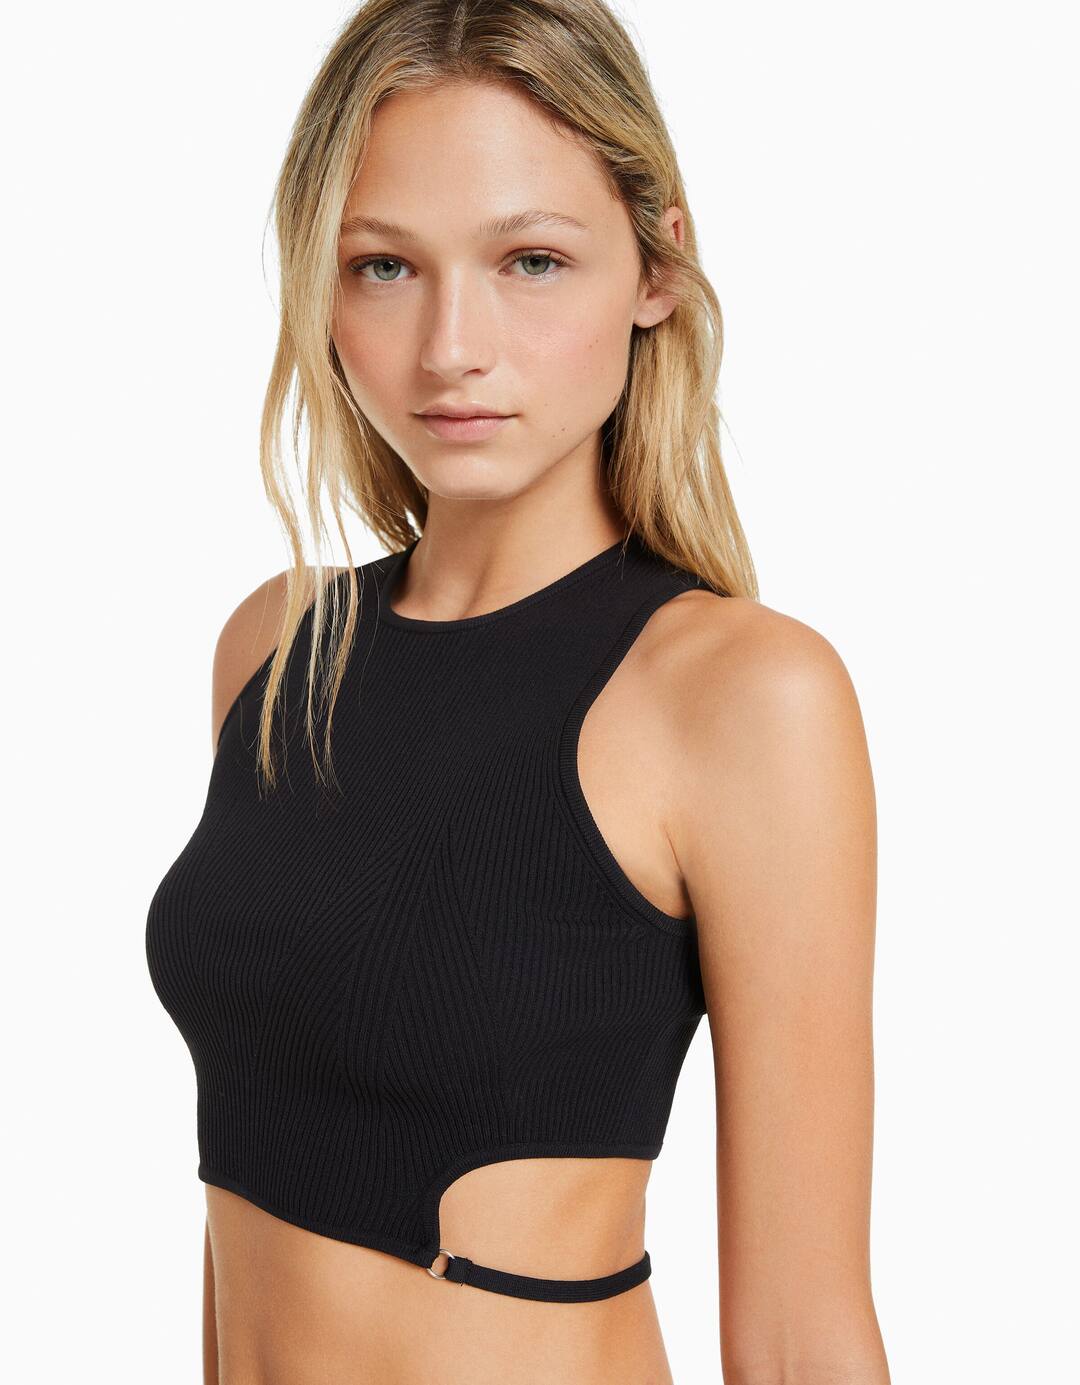 Knit top with strap detail